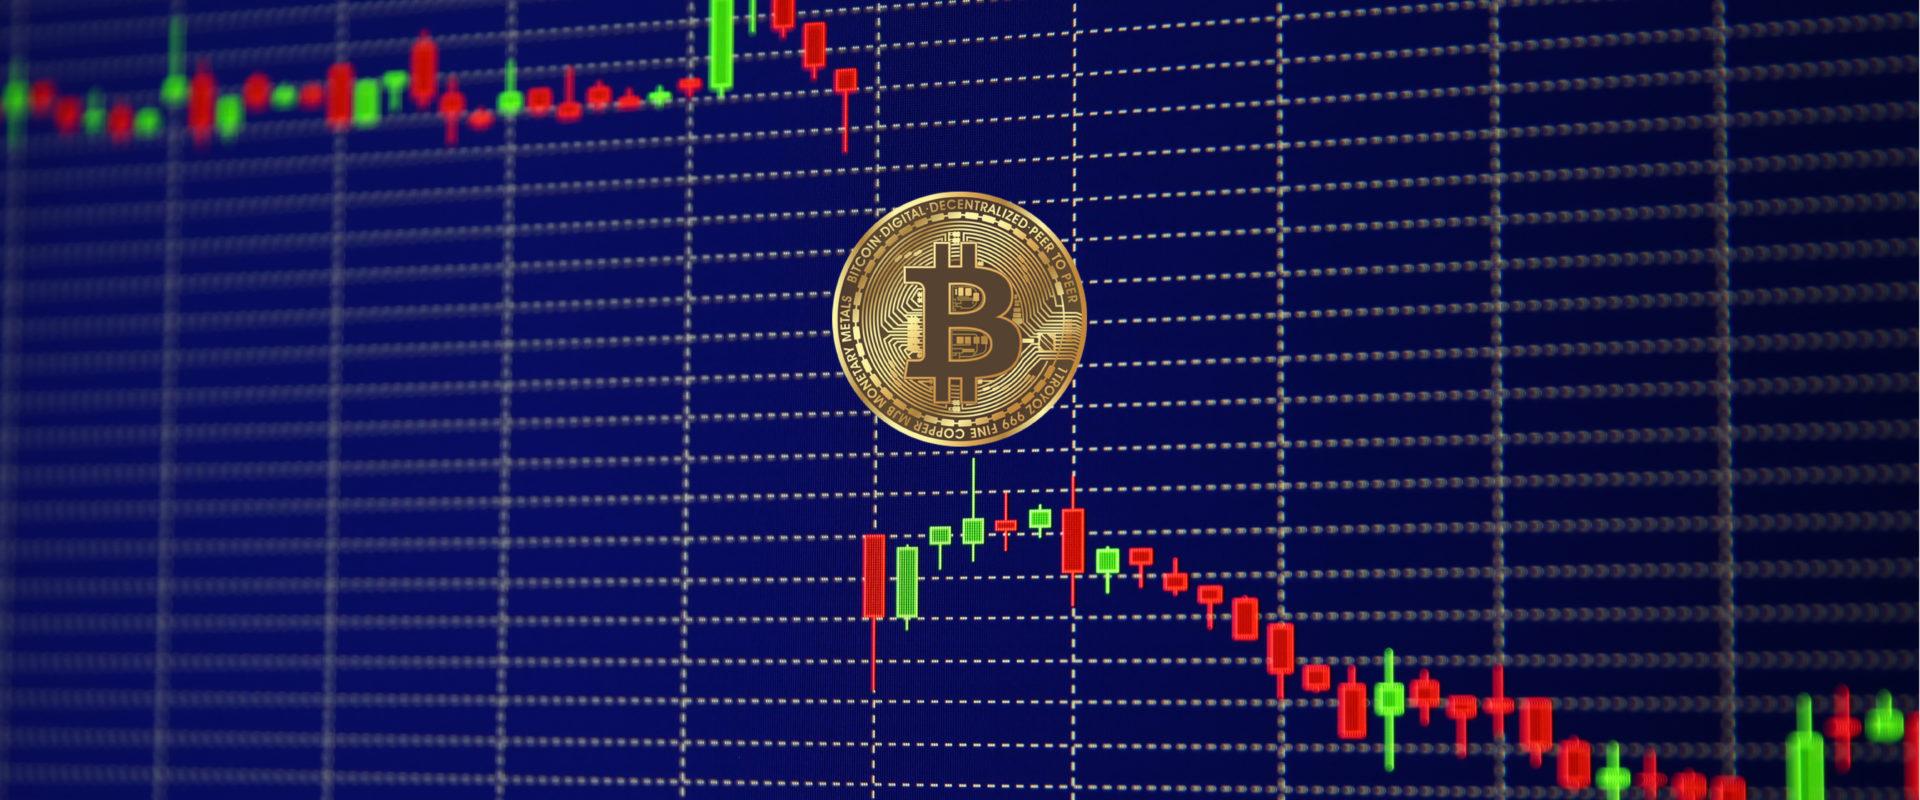 Bitcoin's Volatility Extreme, Feels Like 2013 All Over Again